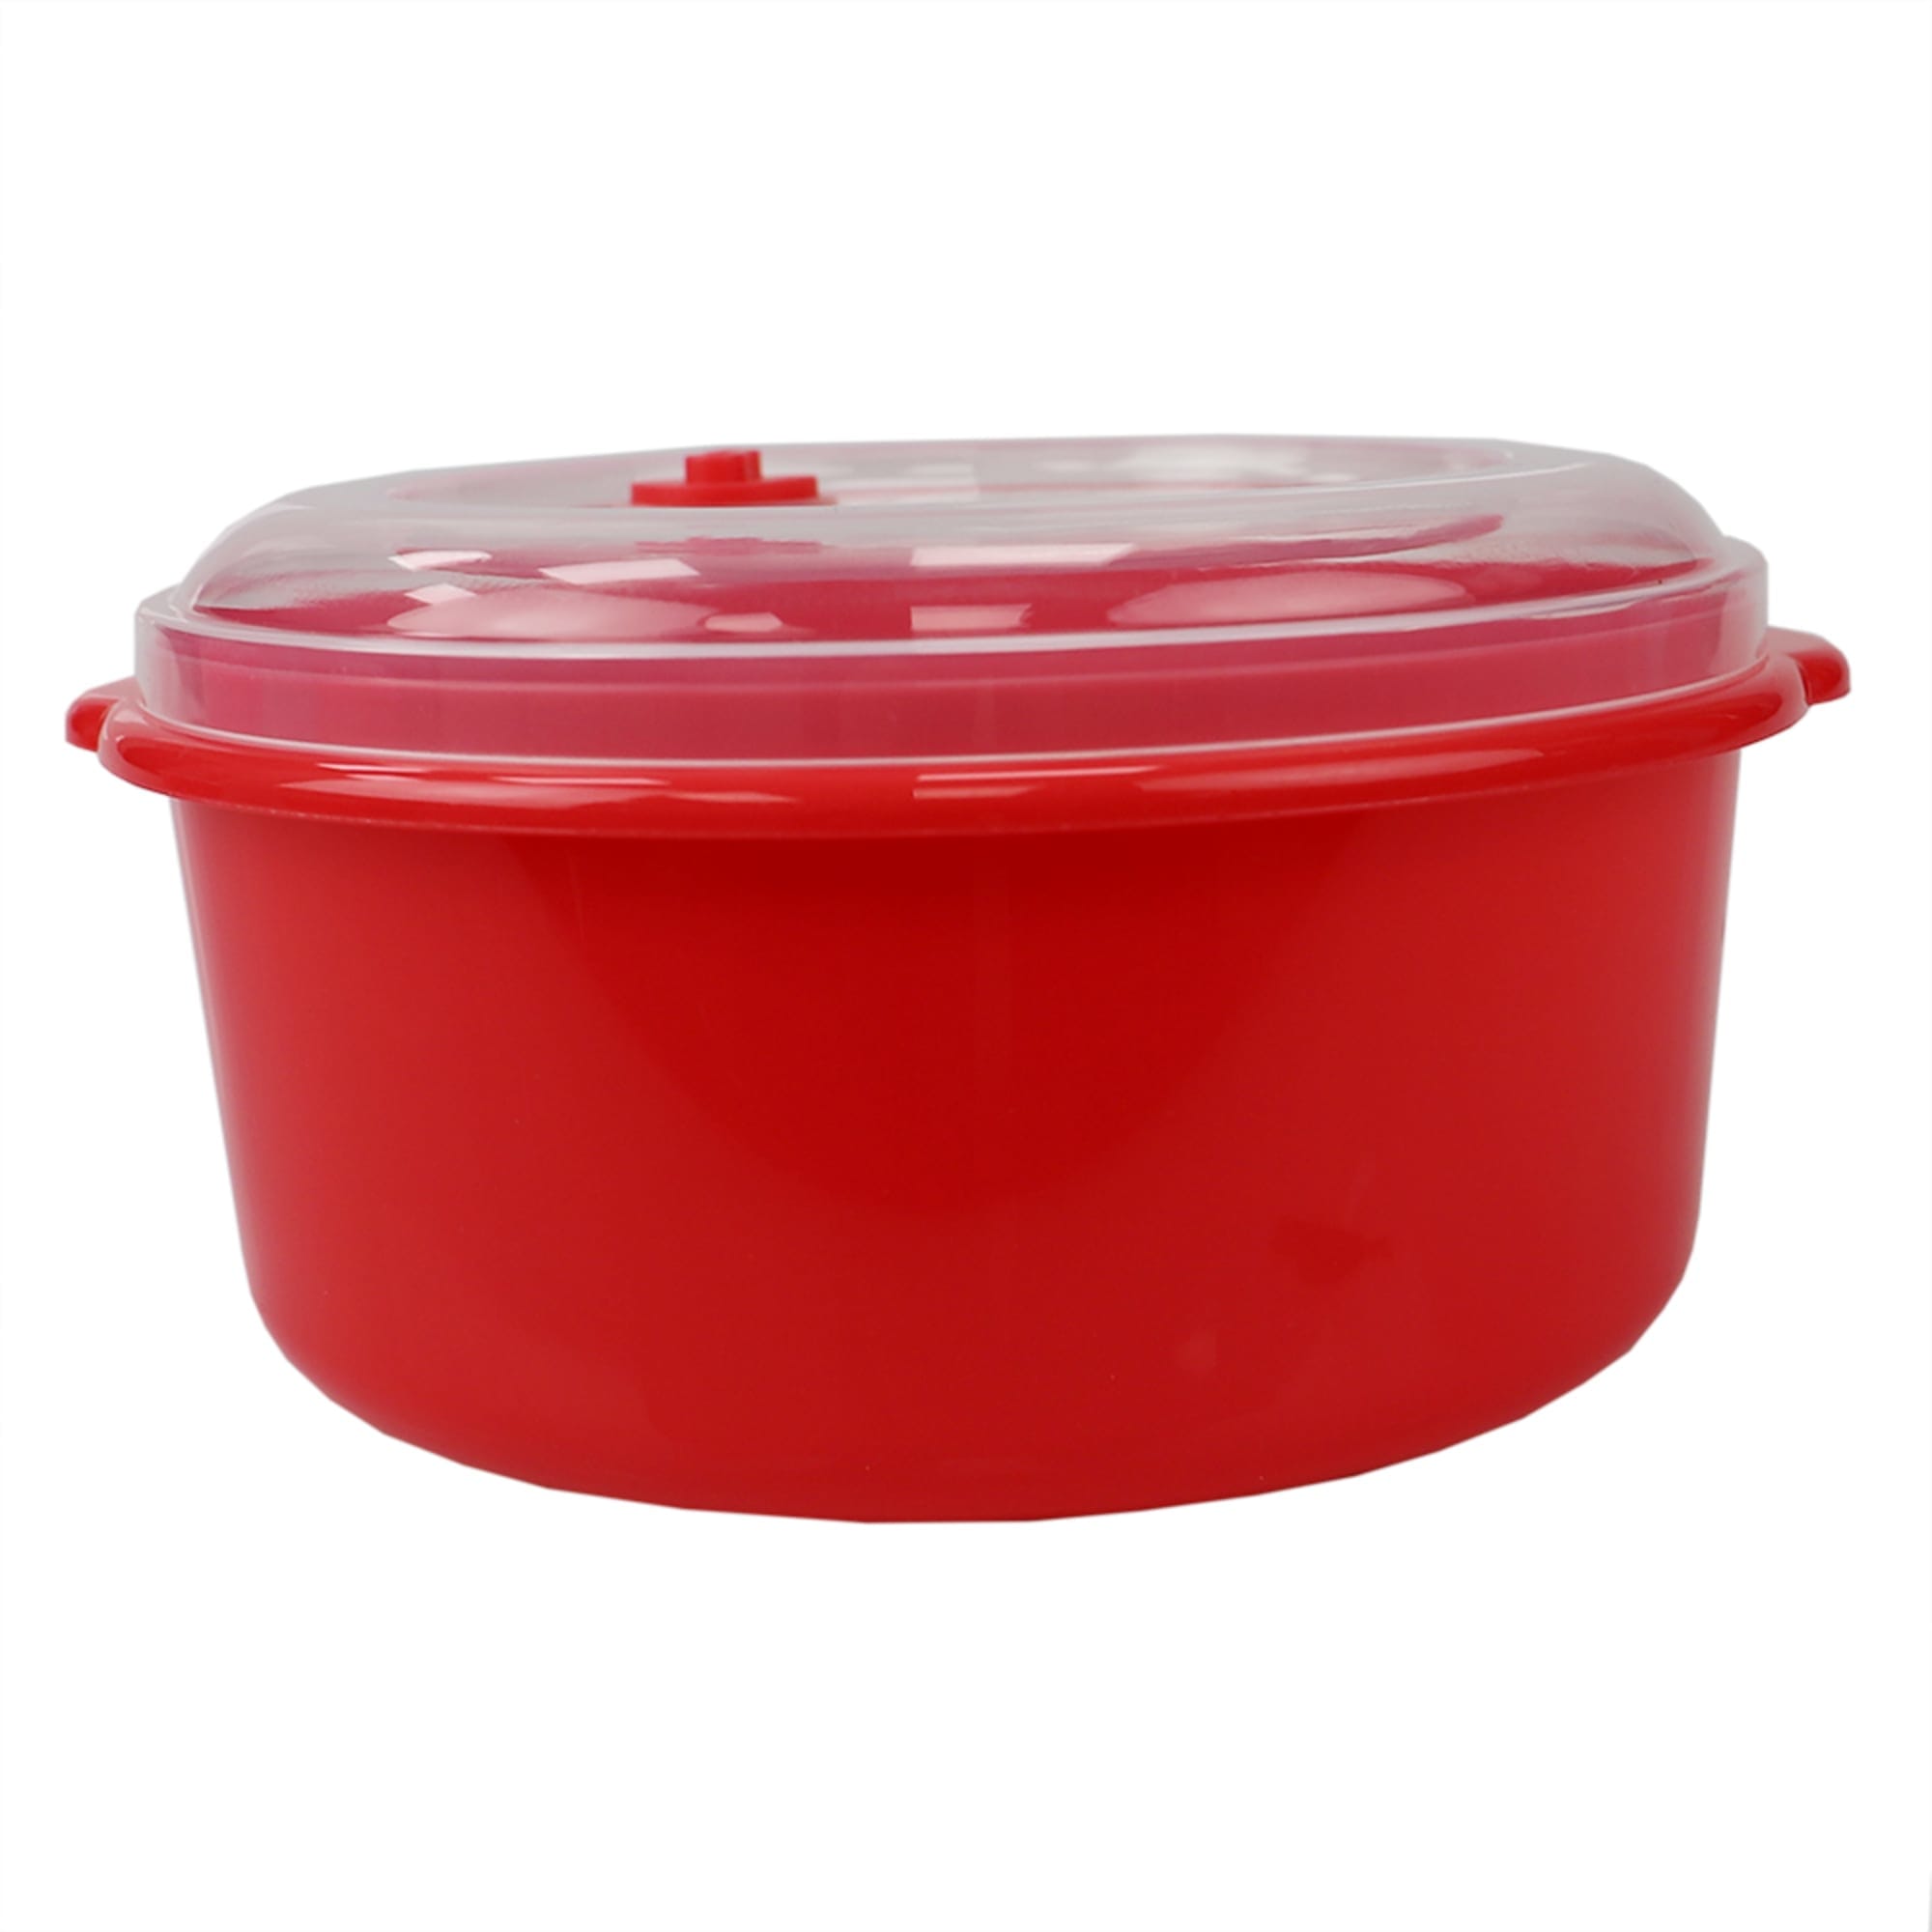 Kitcheniva Plastic Food Containers With Airtight Lids - Red (Pack